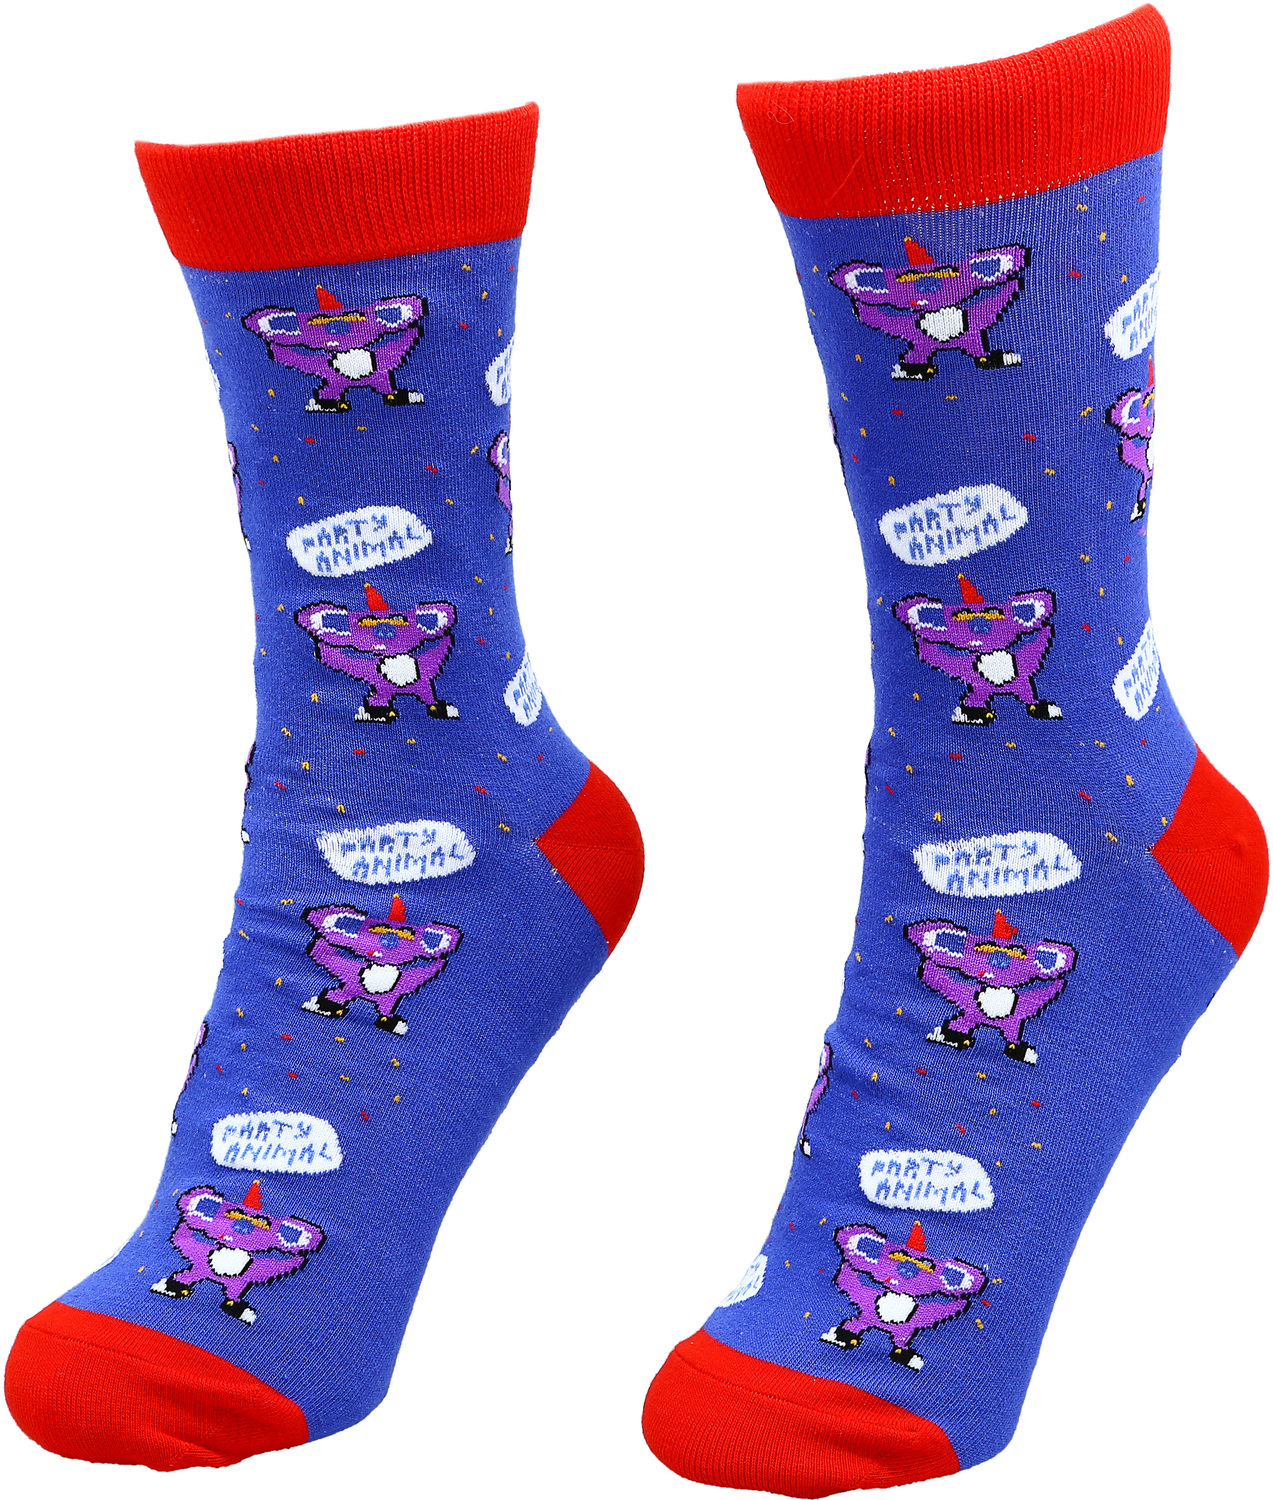 Party by Fugly Friends - Party - S/M Unisex Cotton Blend Sock